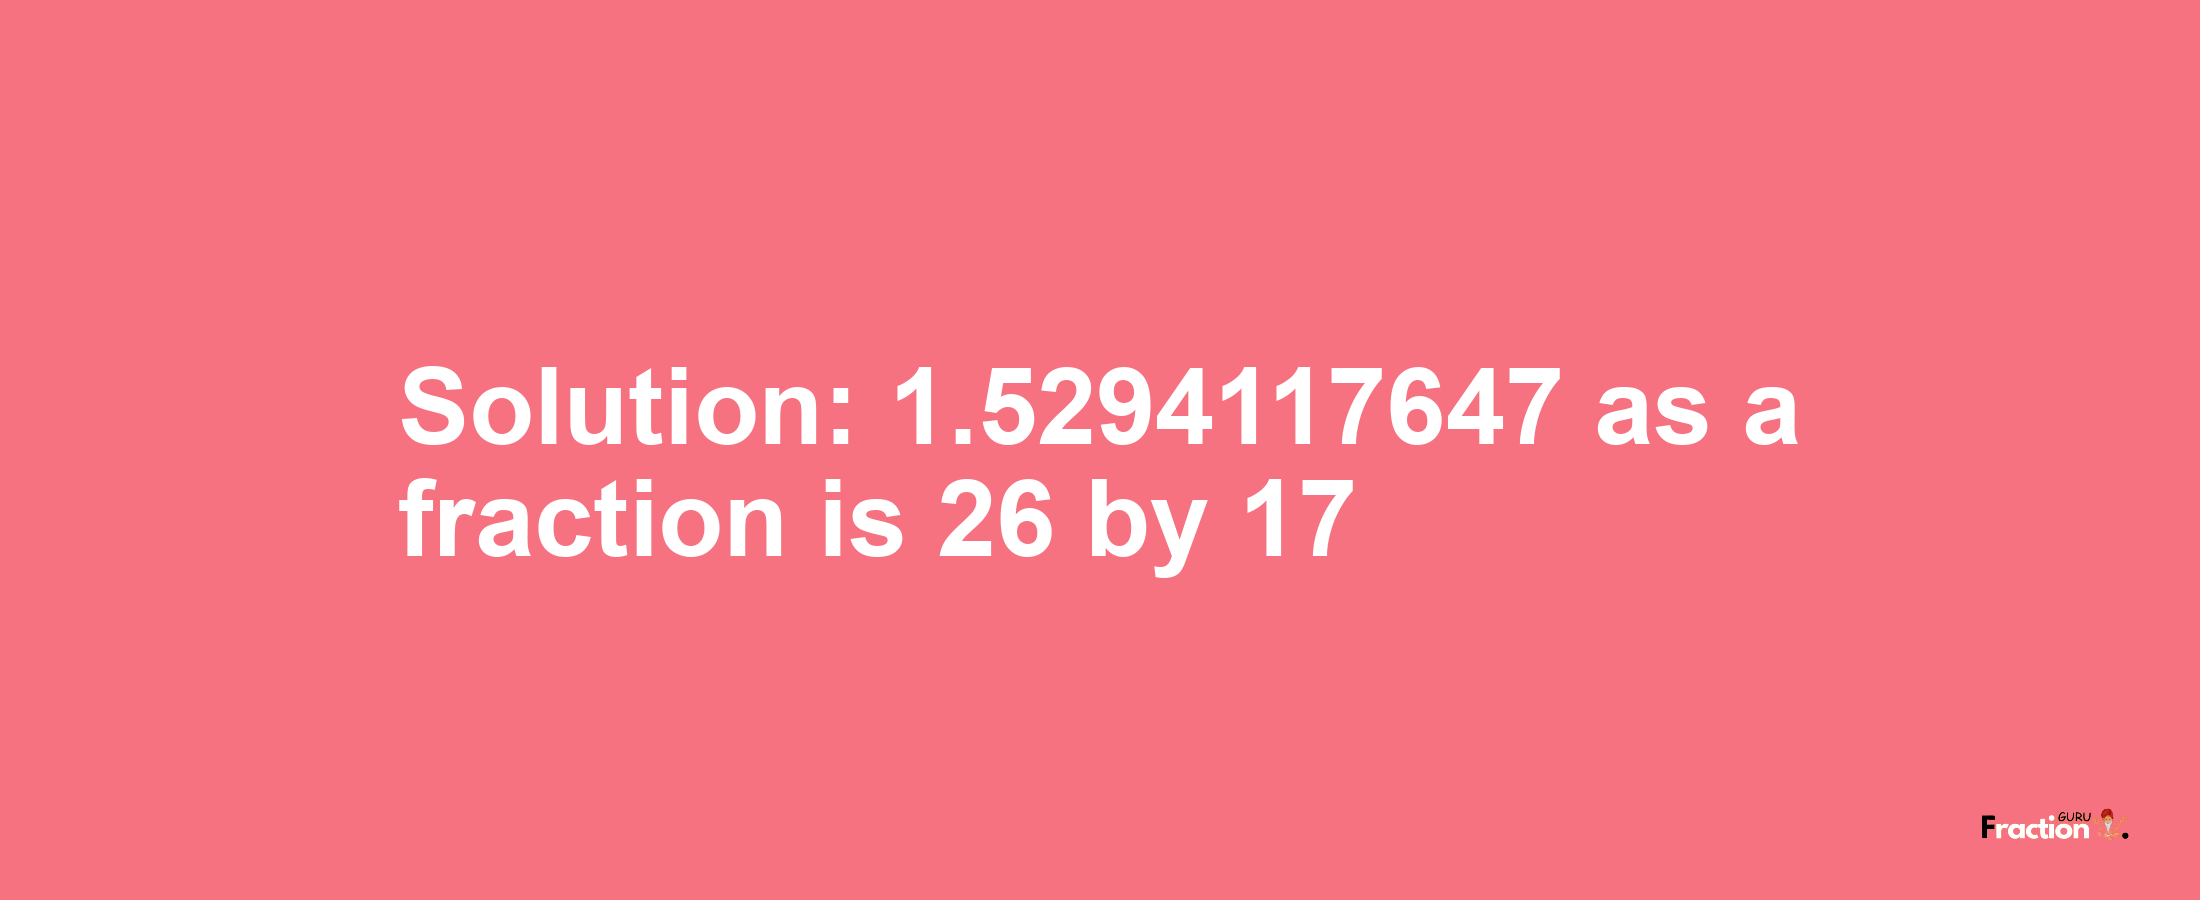 Solution:1.5294117647 as a fraction is 26/17